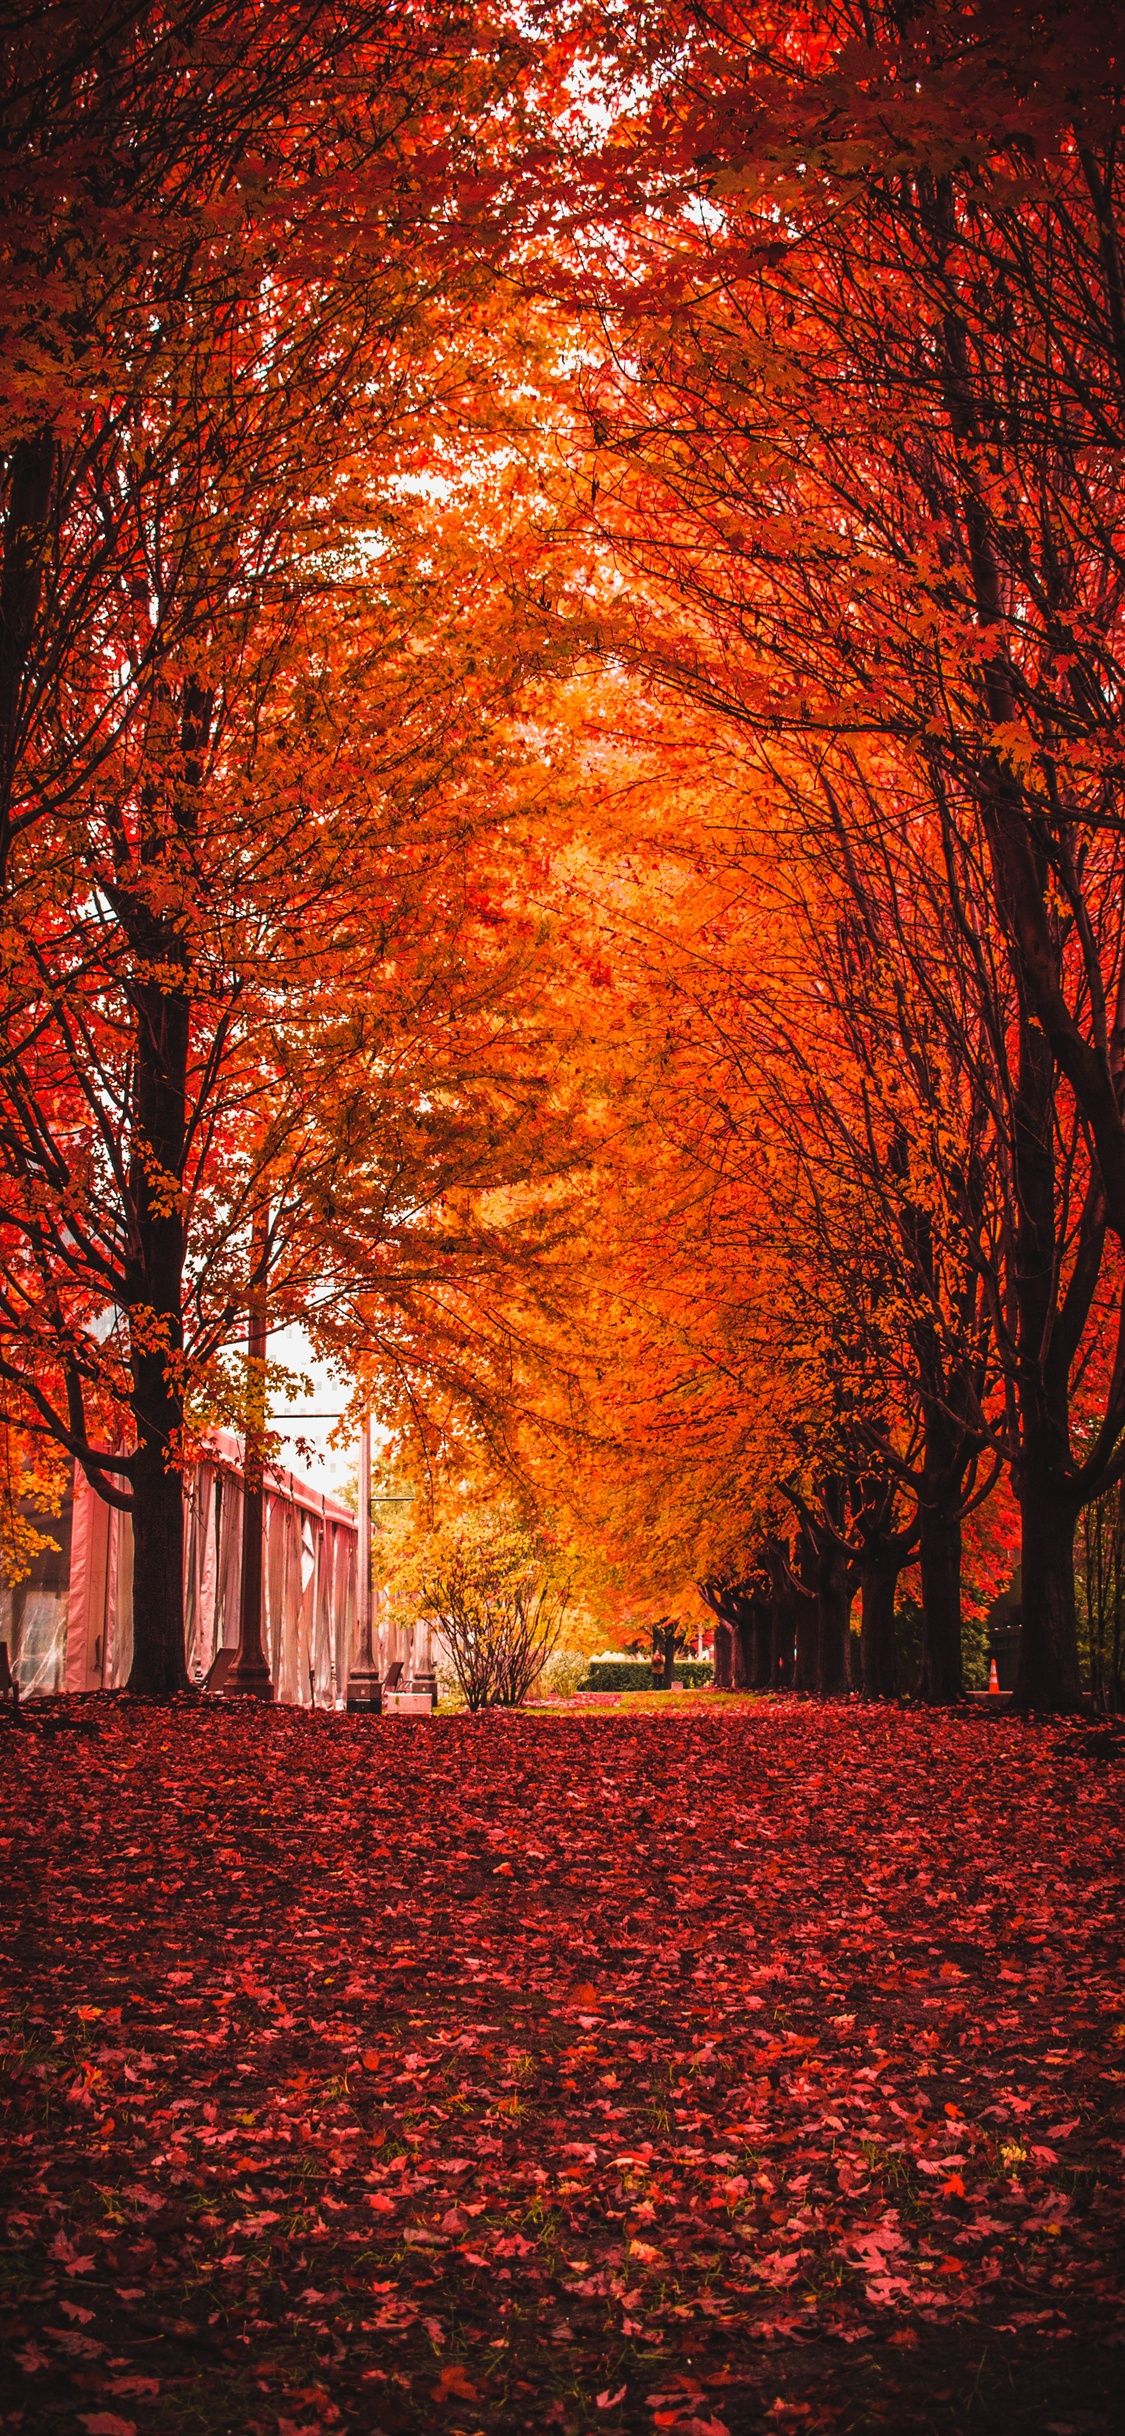 Trees, leaves, path, autumn iPhone XS Max, X 3GS wallpaper download